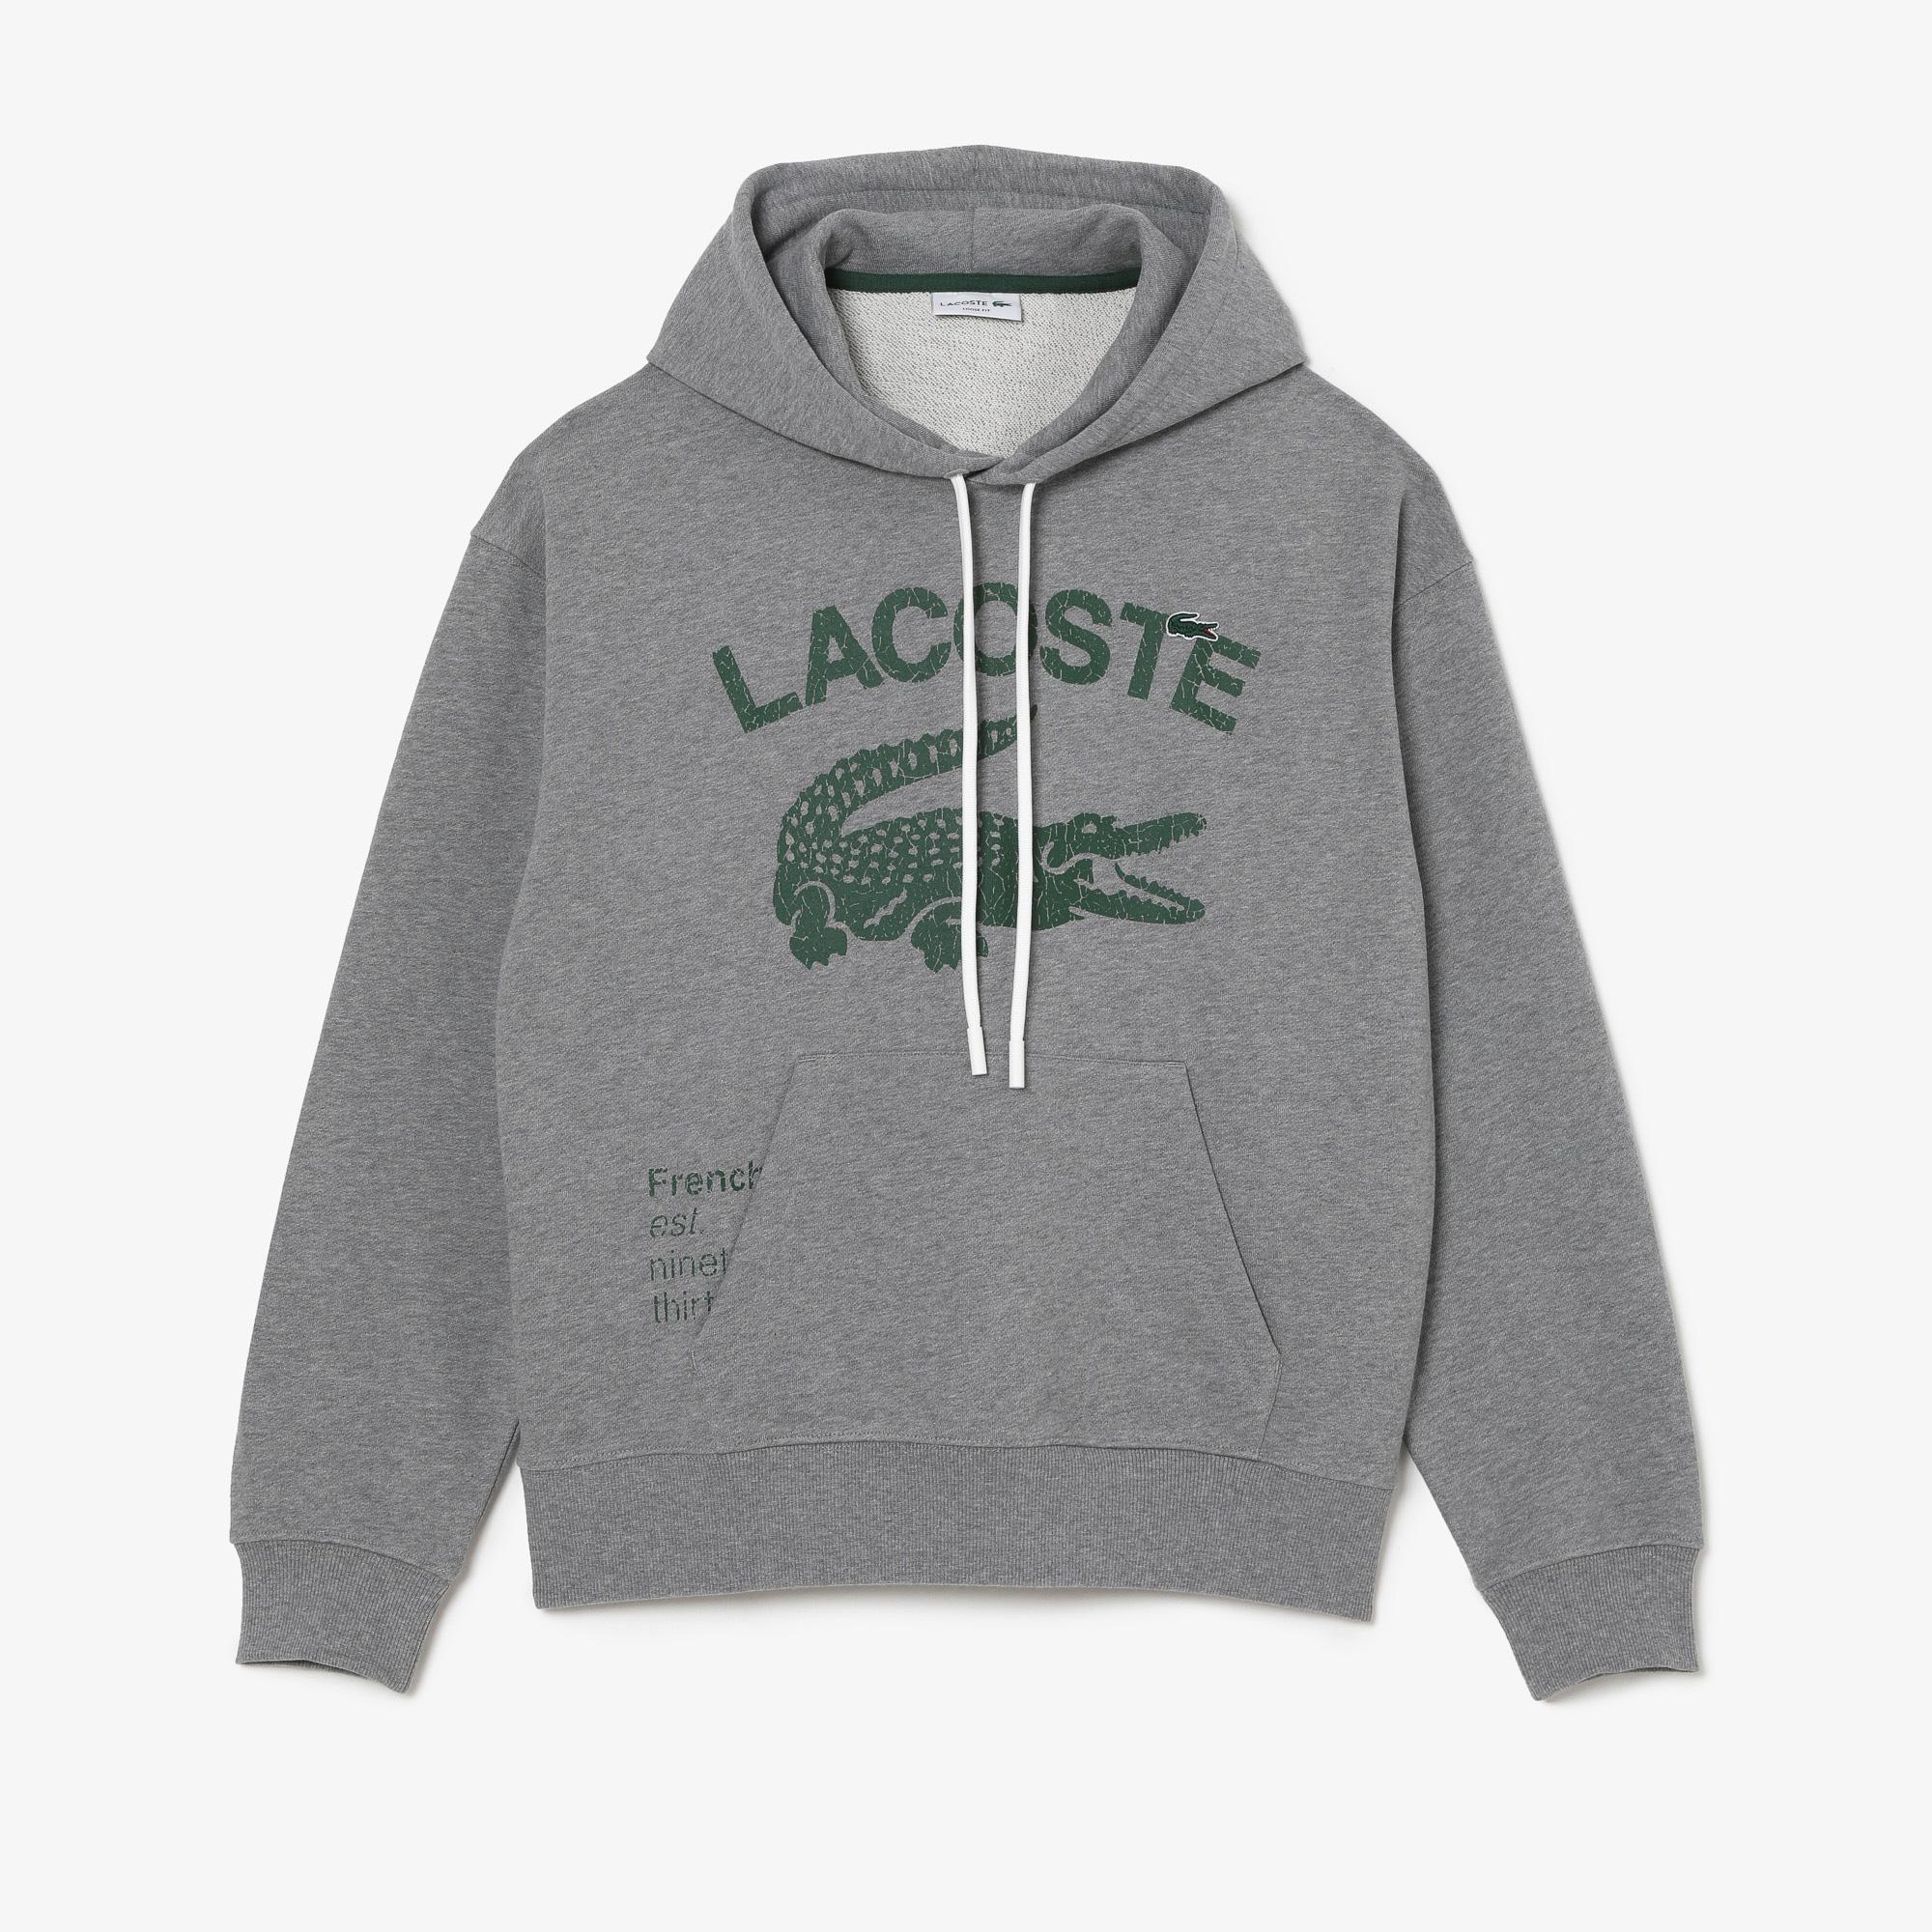 Lacoste Classic Fit Solid Hoodie